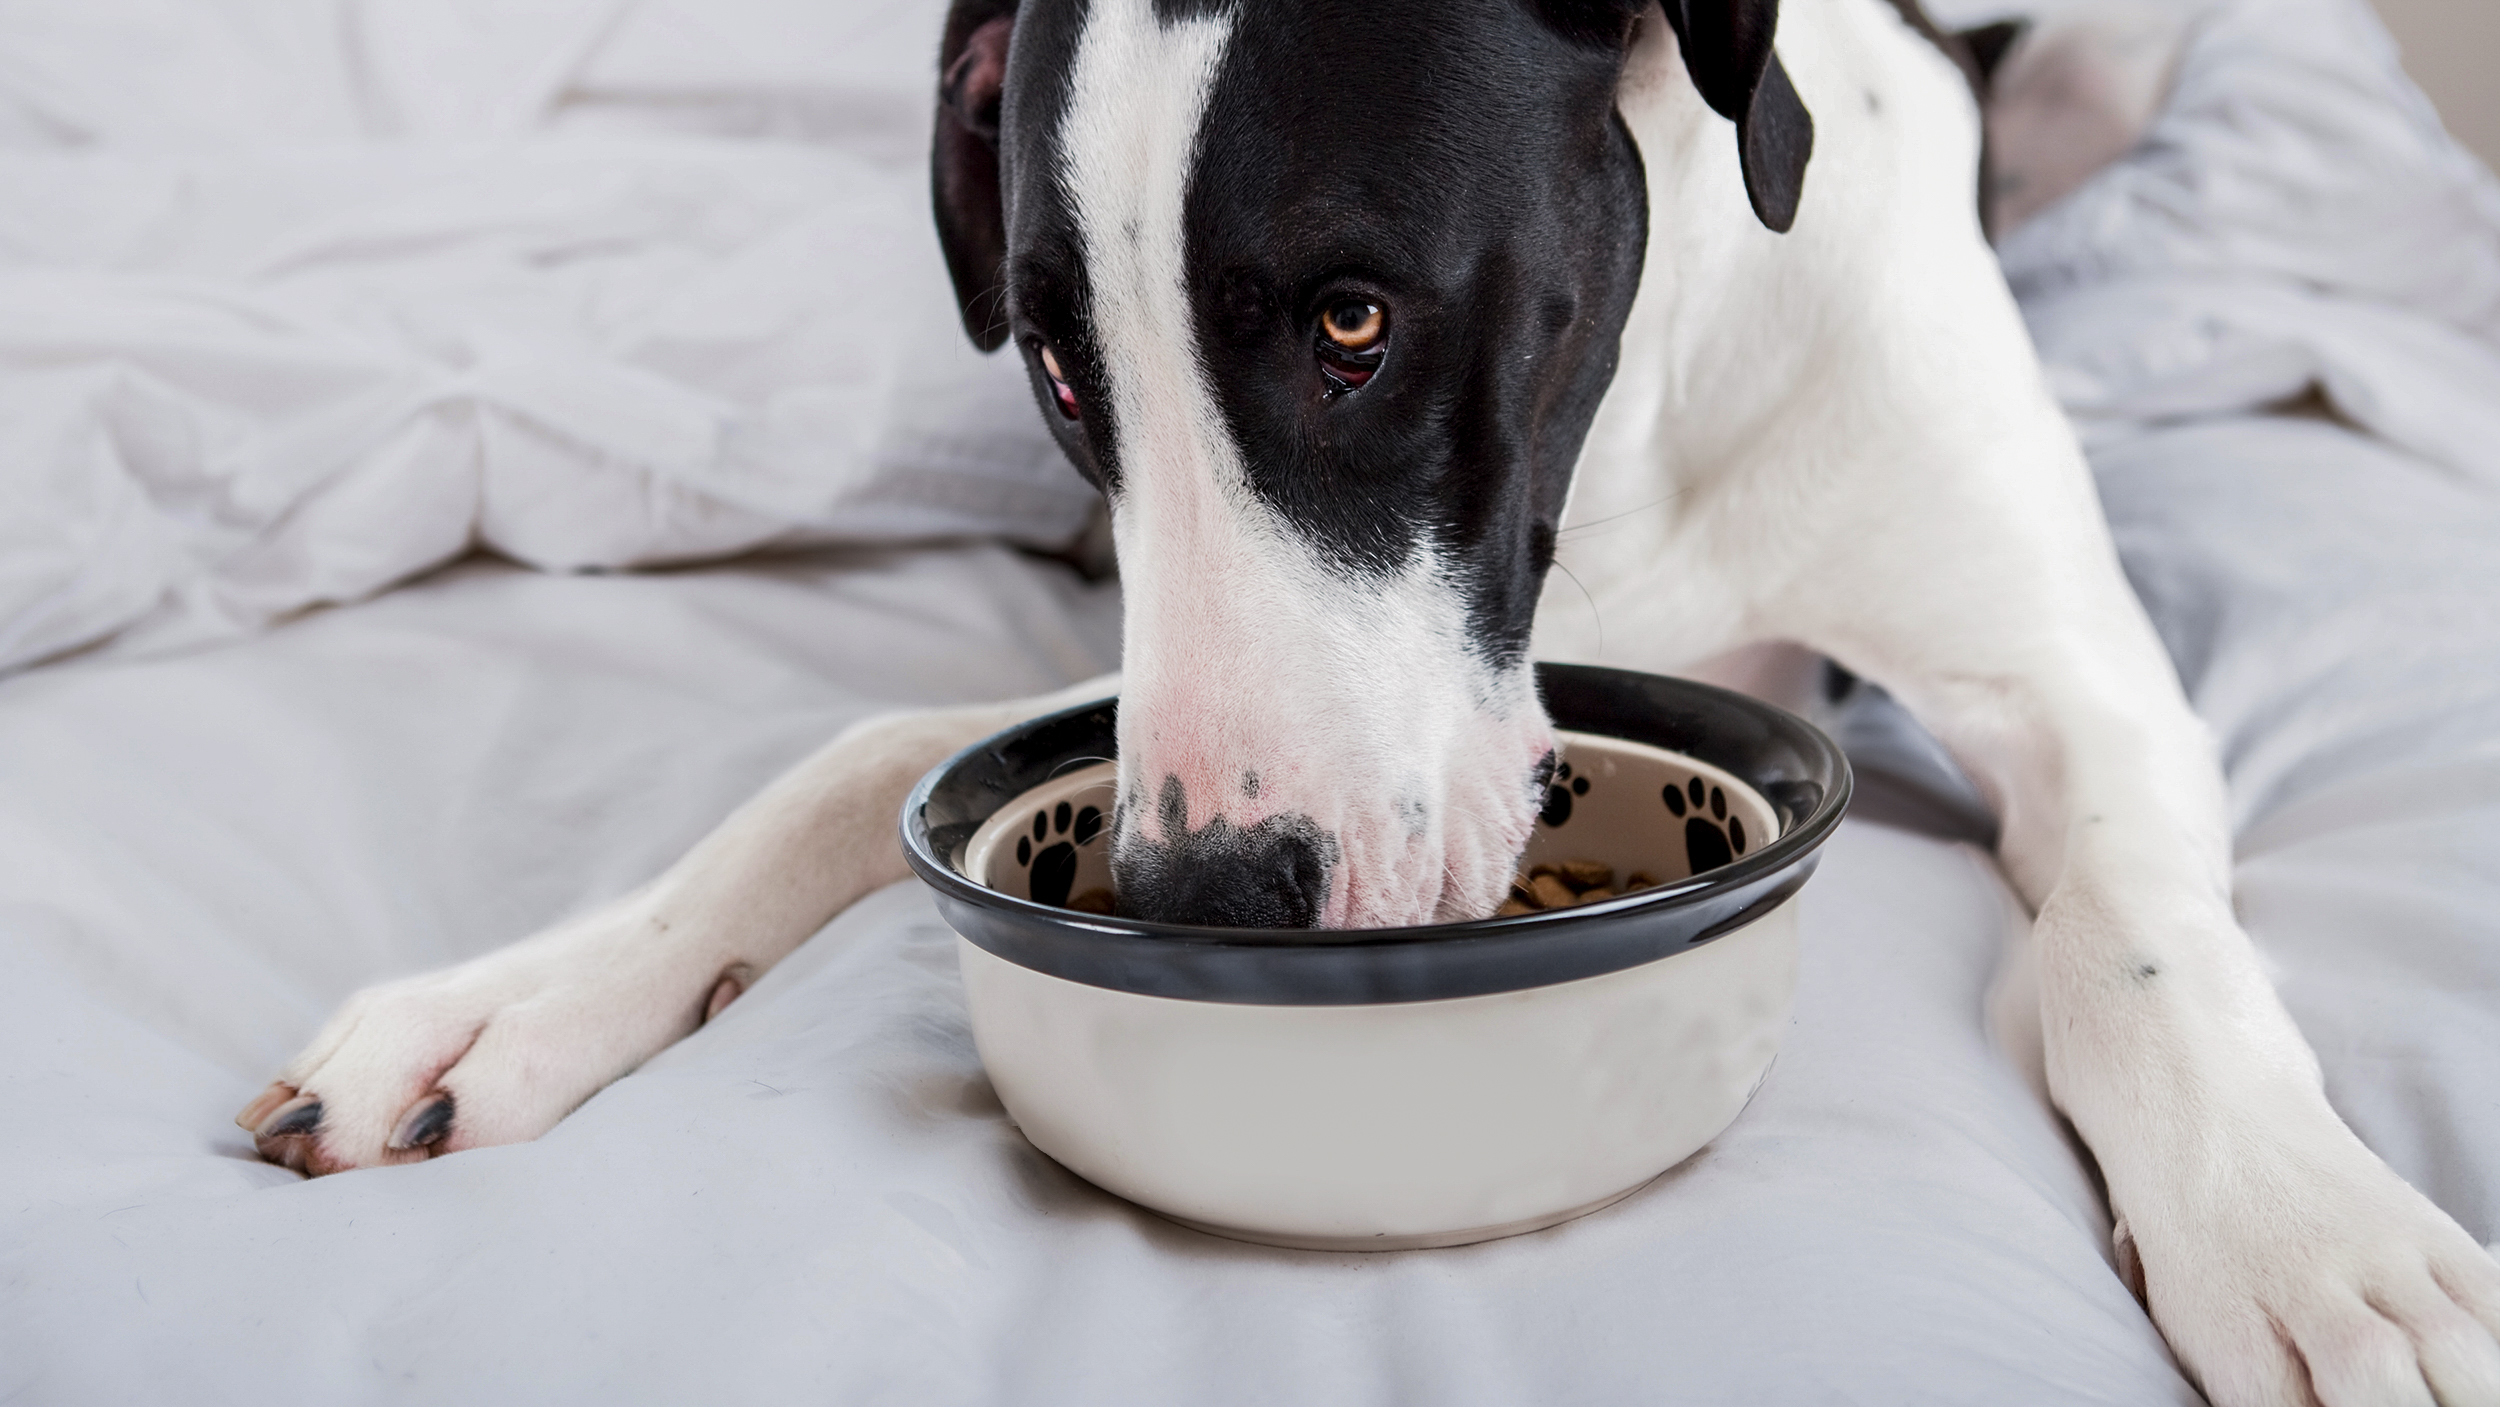 Adult dog lying down indoors on a blanket eating from a black and white bowl.